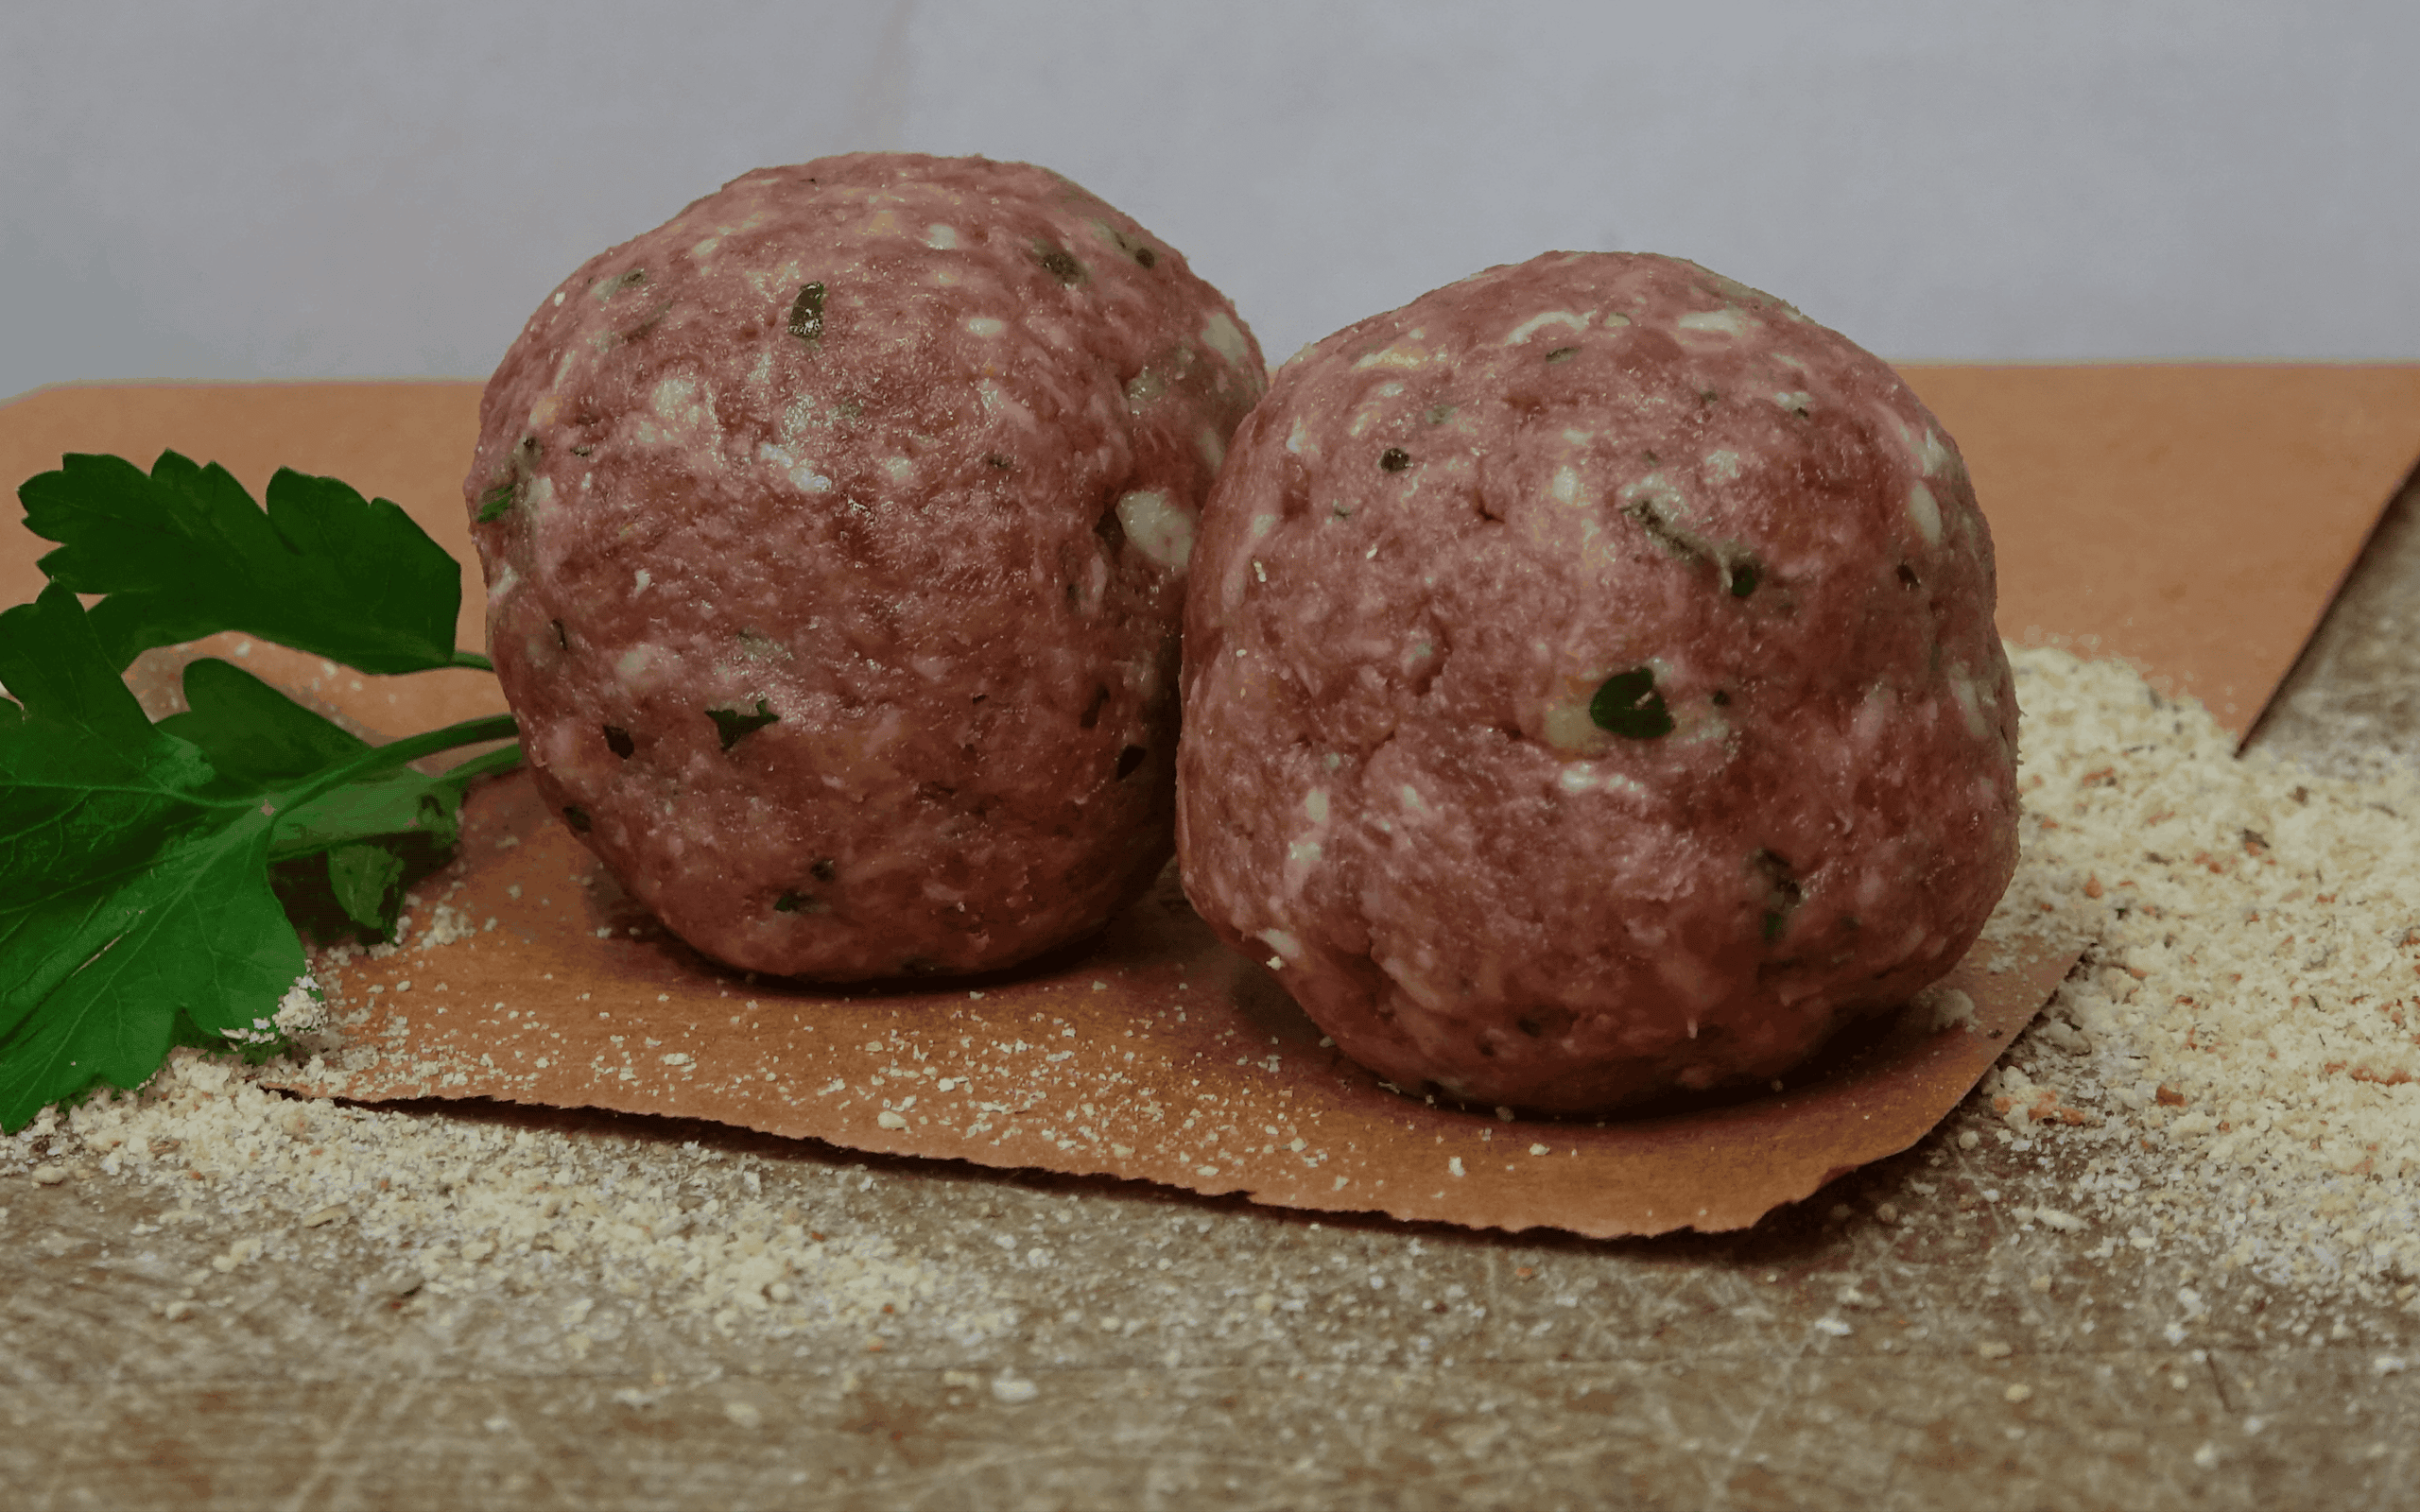 Vincent's Homemade Meatballs - Pack of 12  - 2.4oz each